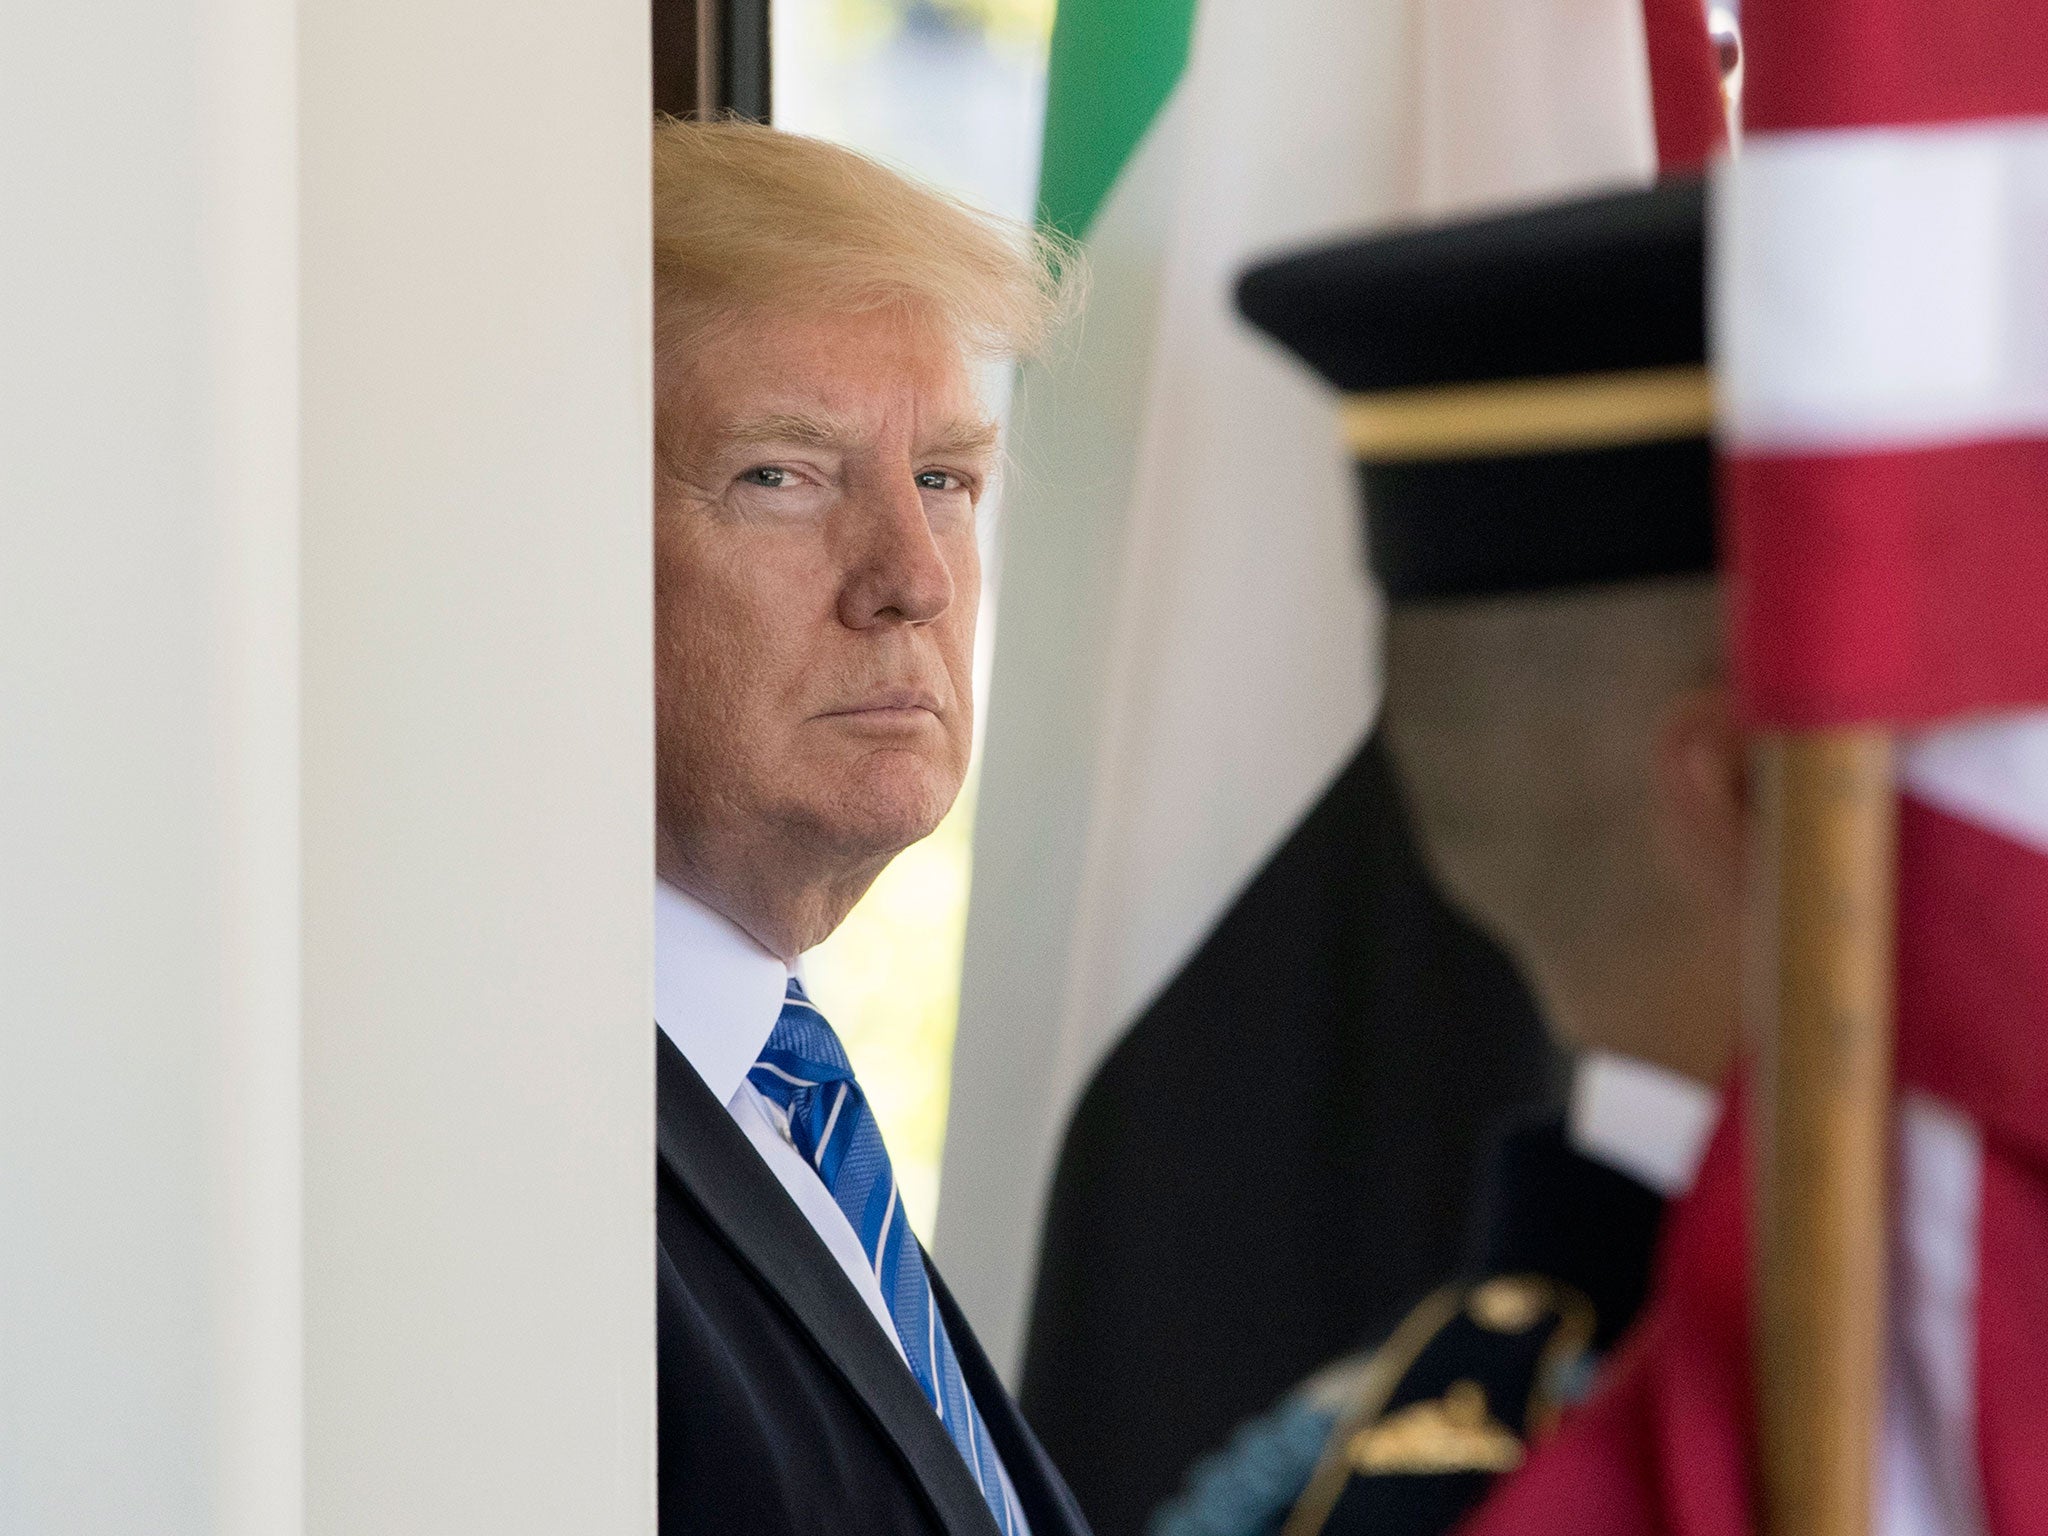 US President Donald Trump waits to welcome Crown Prince of Abu Dhabi Mohammed bin Zayed Al Nuhyan (not pictured), at the West Wing of the White House in Washington, DC, USA, 15 May 2017.